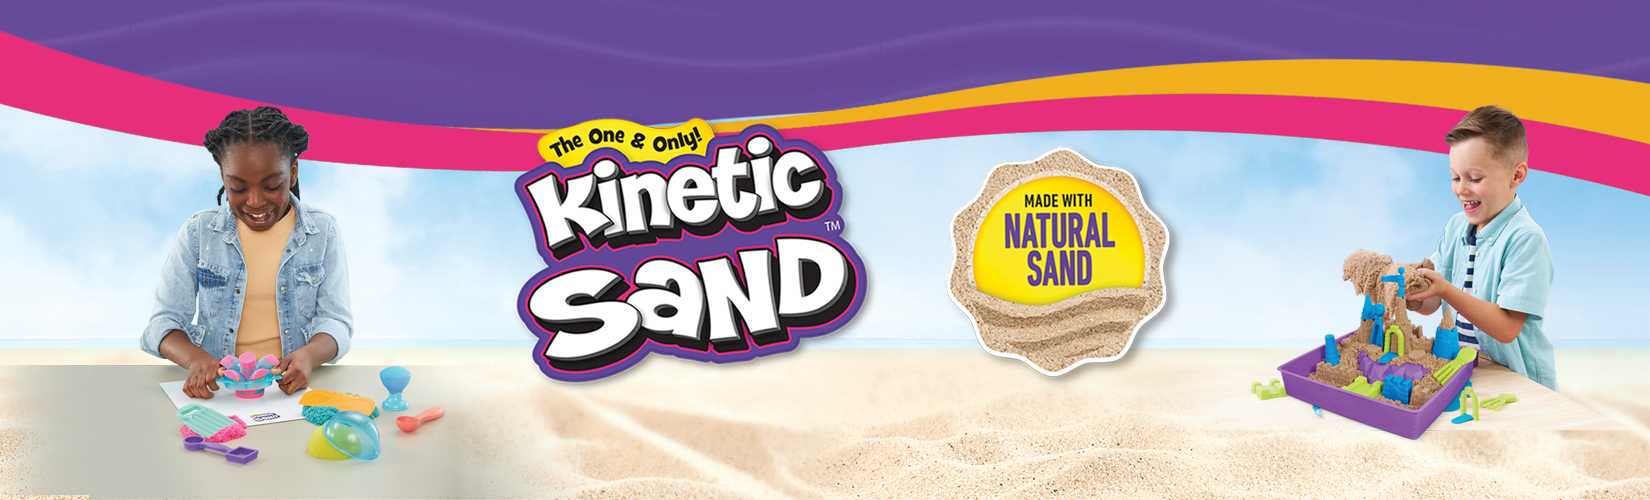 The one & only Kinetic Sand. Made with natural sand.